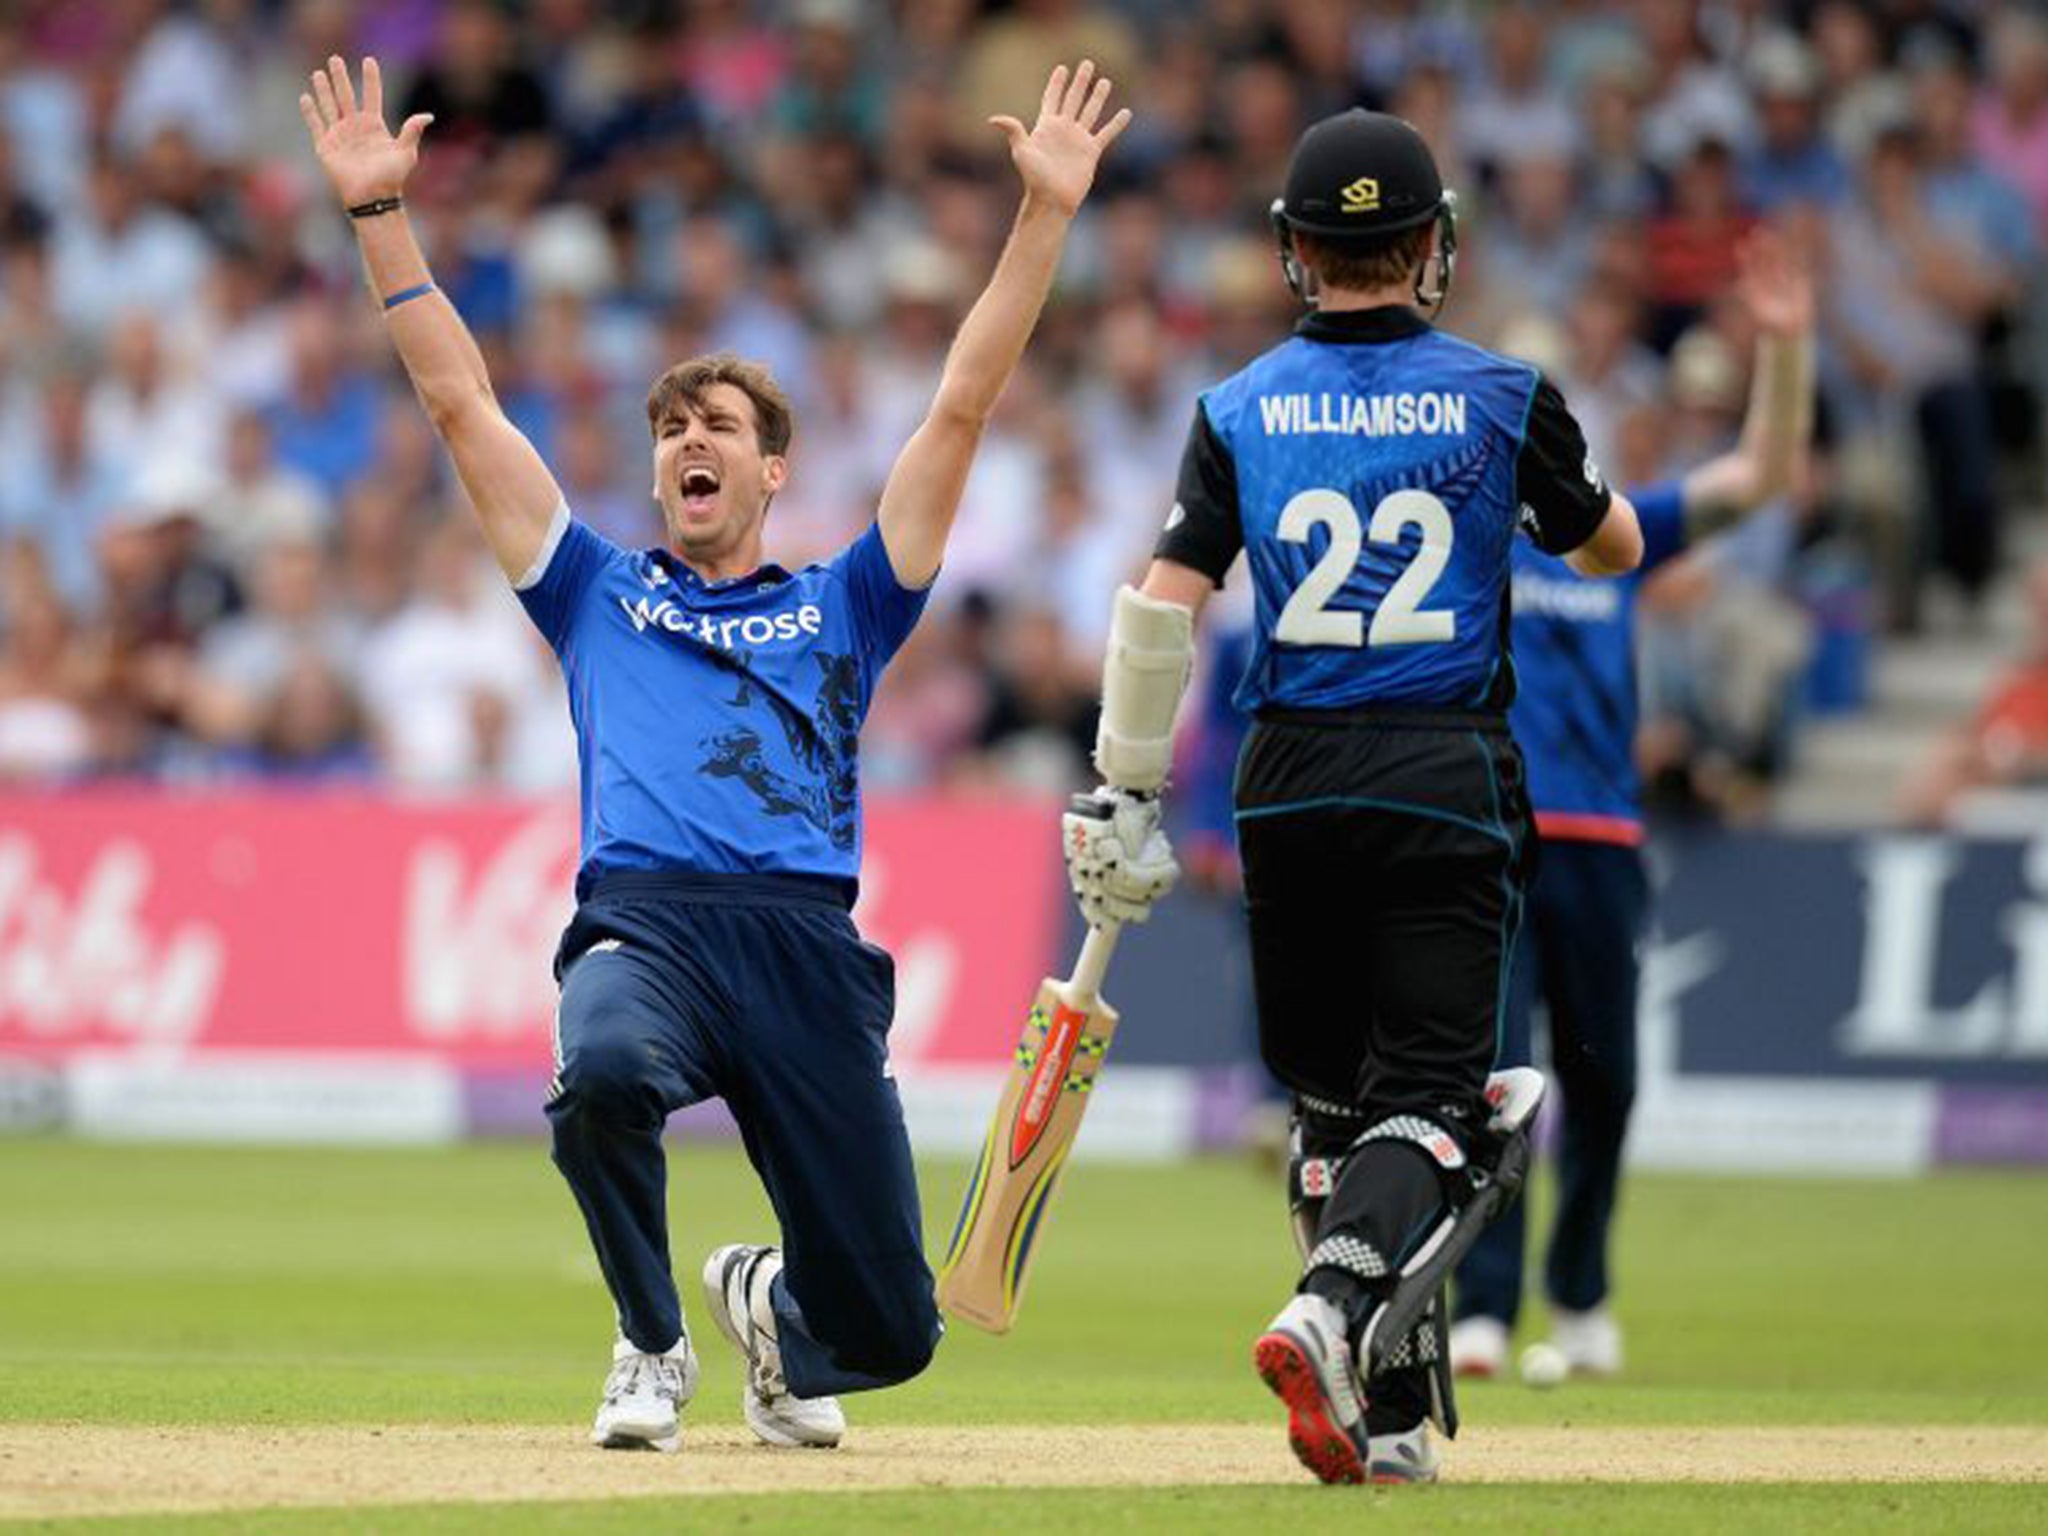 The England bowler Steve Finn appeals during Wednesday’s one-day victory over New Zealand at Trent Bridge, where he returned figures of 1 for 51